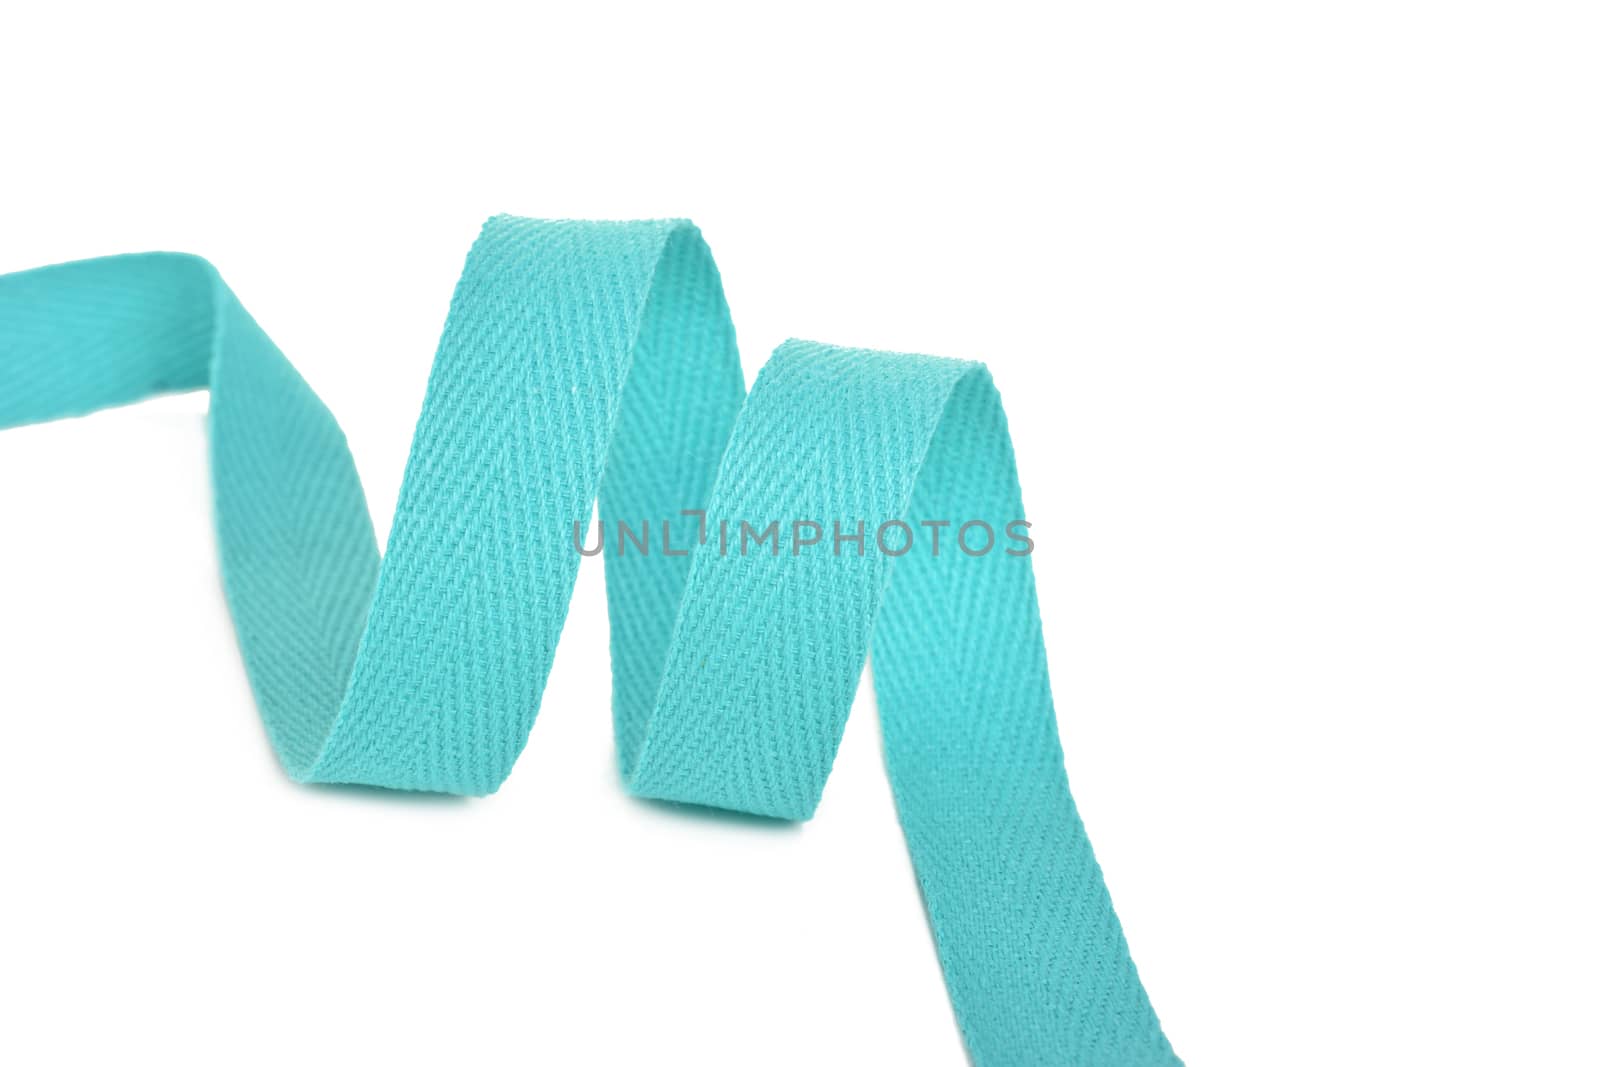 emerald Twisted ribbon of cotton Keeper braid on white background. Tape For sewing clothes.